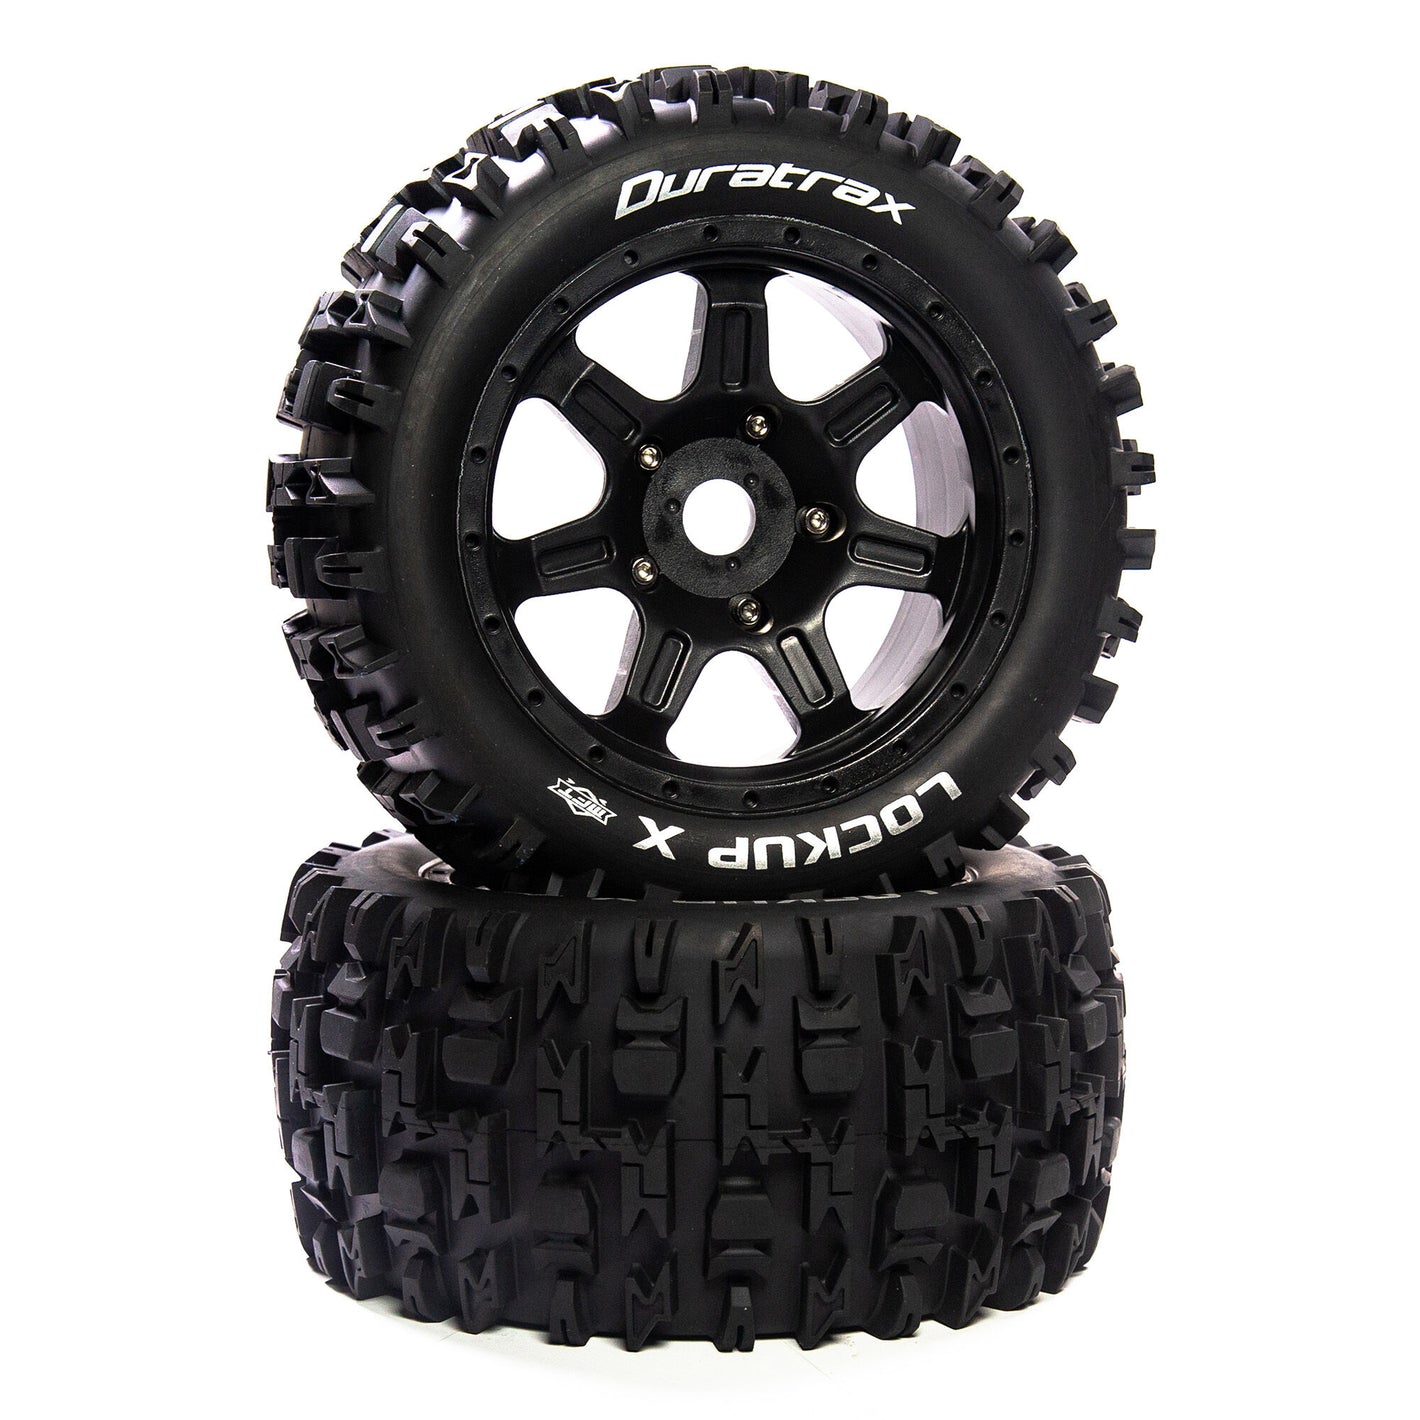 DuraTrax Lockup X Belted Mounted Black 24mm Kraton 8S (2)